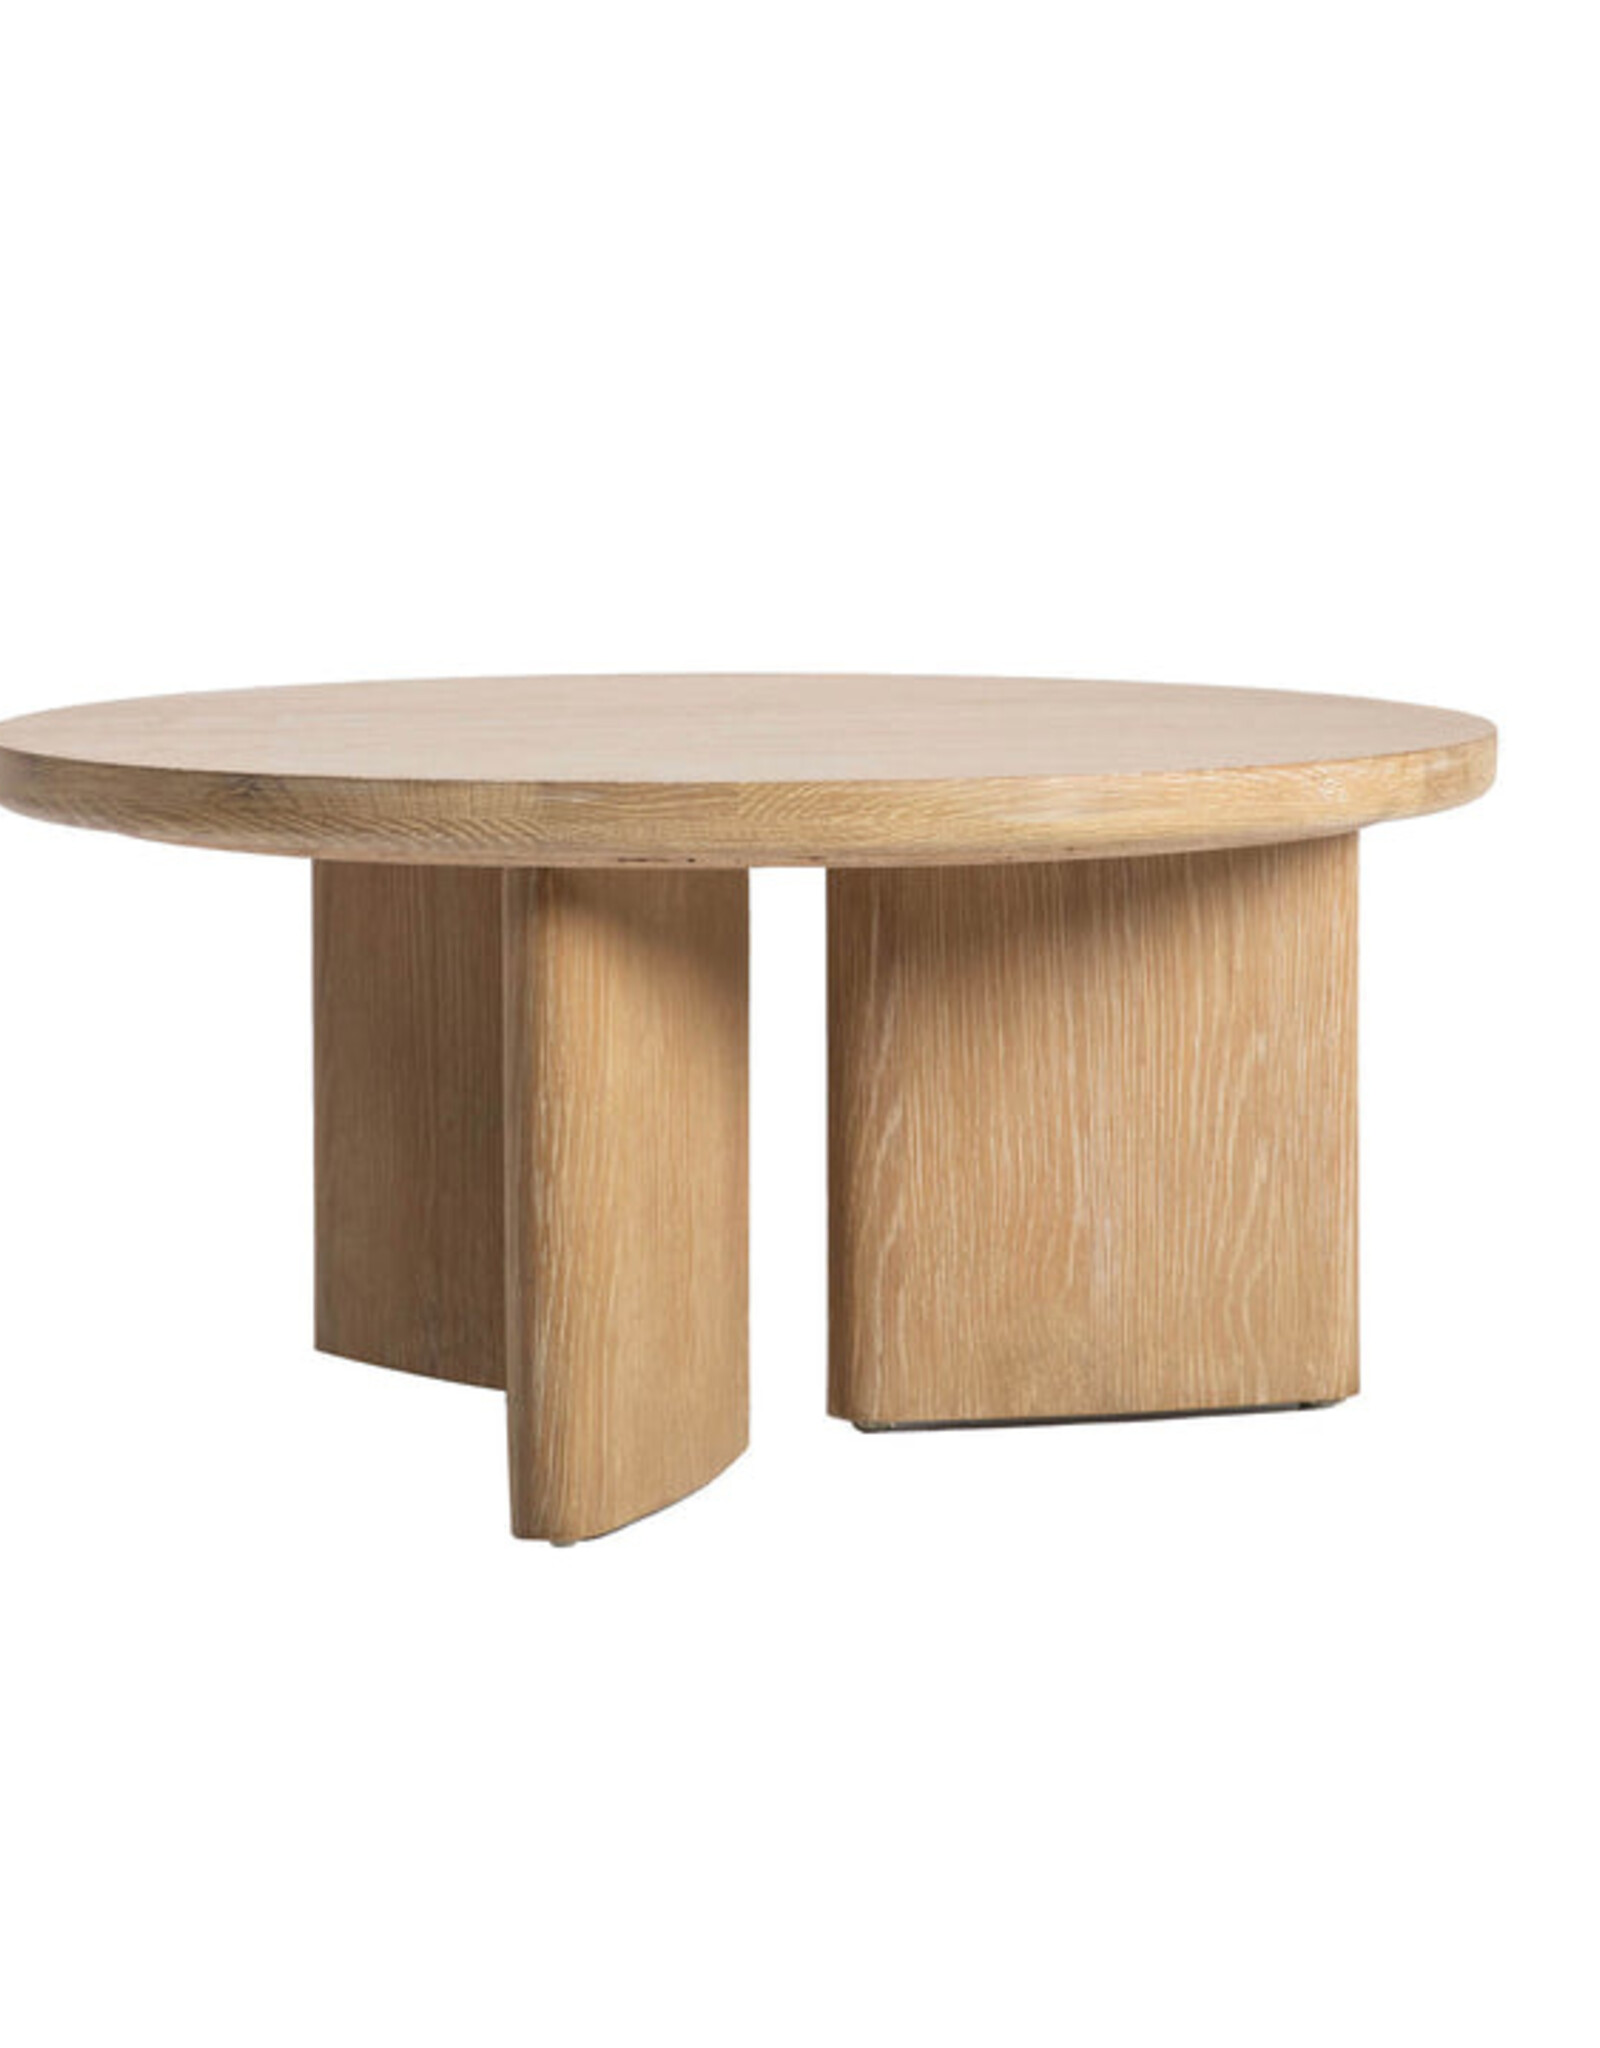 LH Imports LH Infinity Coffee Table Wood INF032S-WT